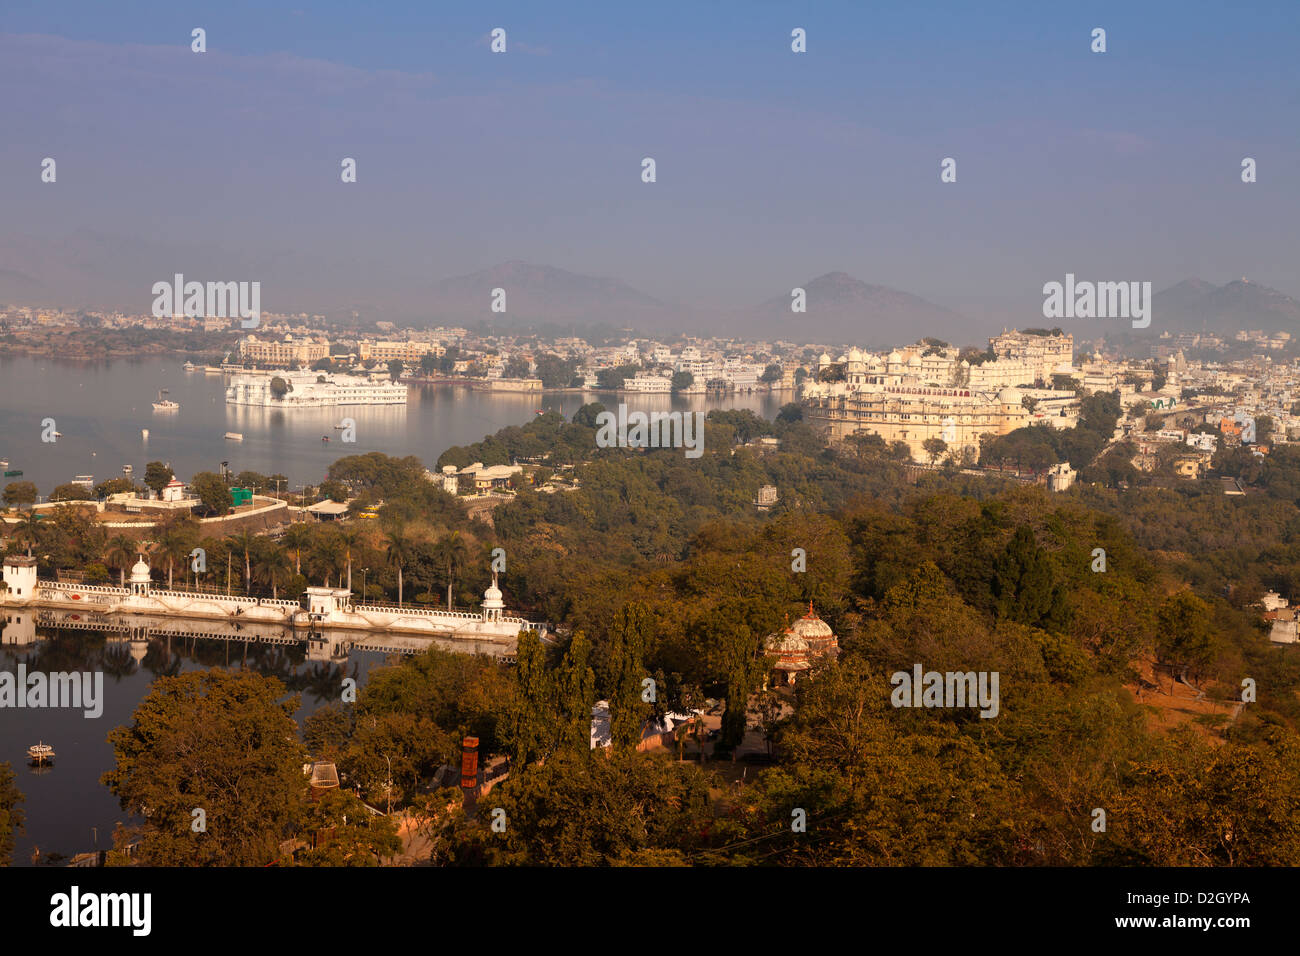 India, Rajasthan, Udaipur, View of Lake Pichola and Udaipur in early morning light Stock Photo